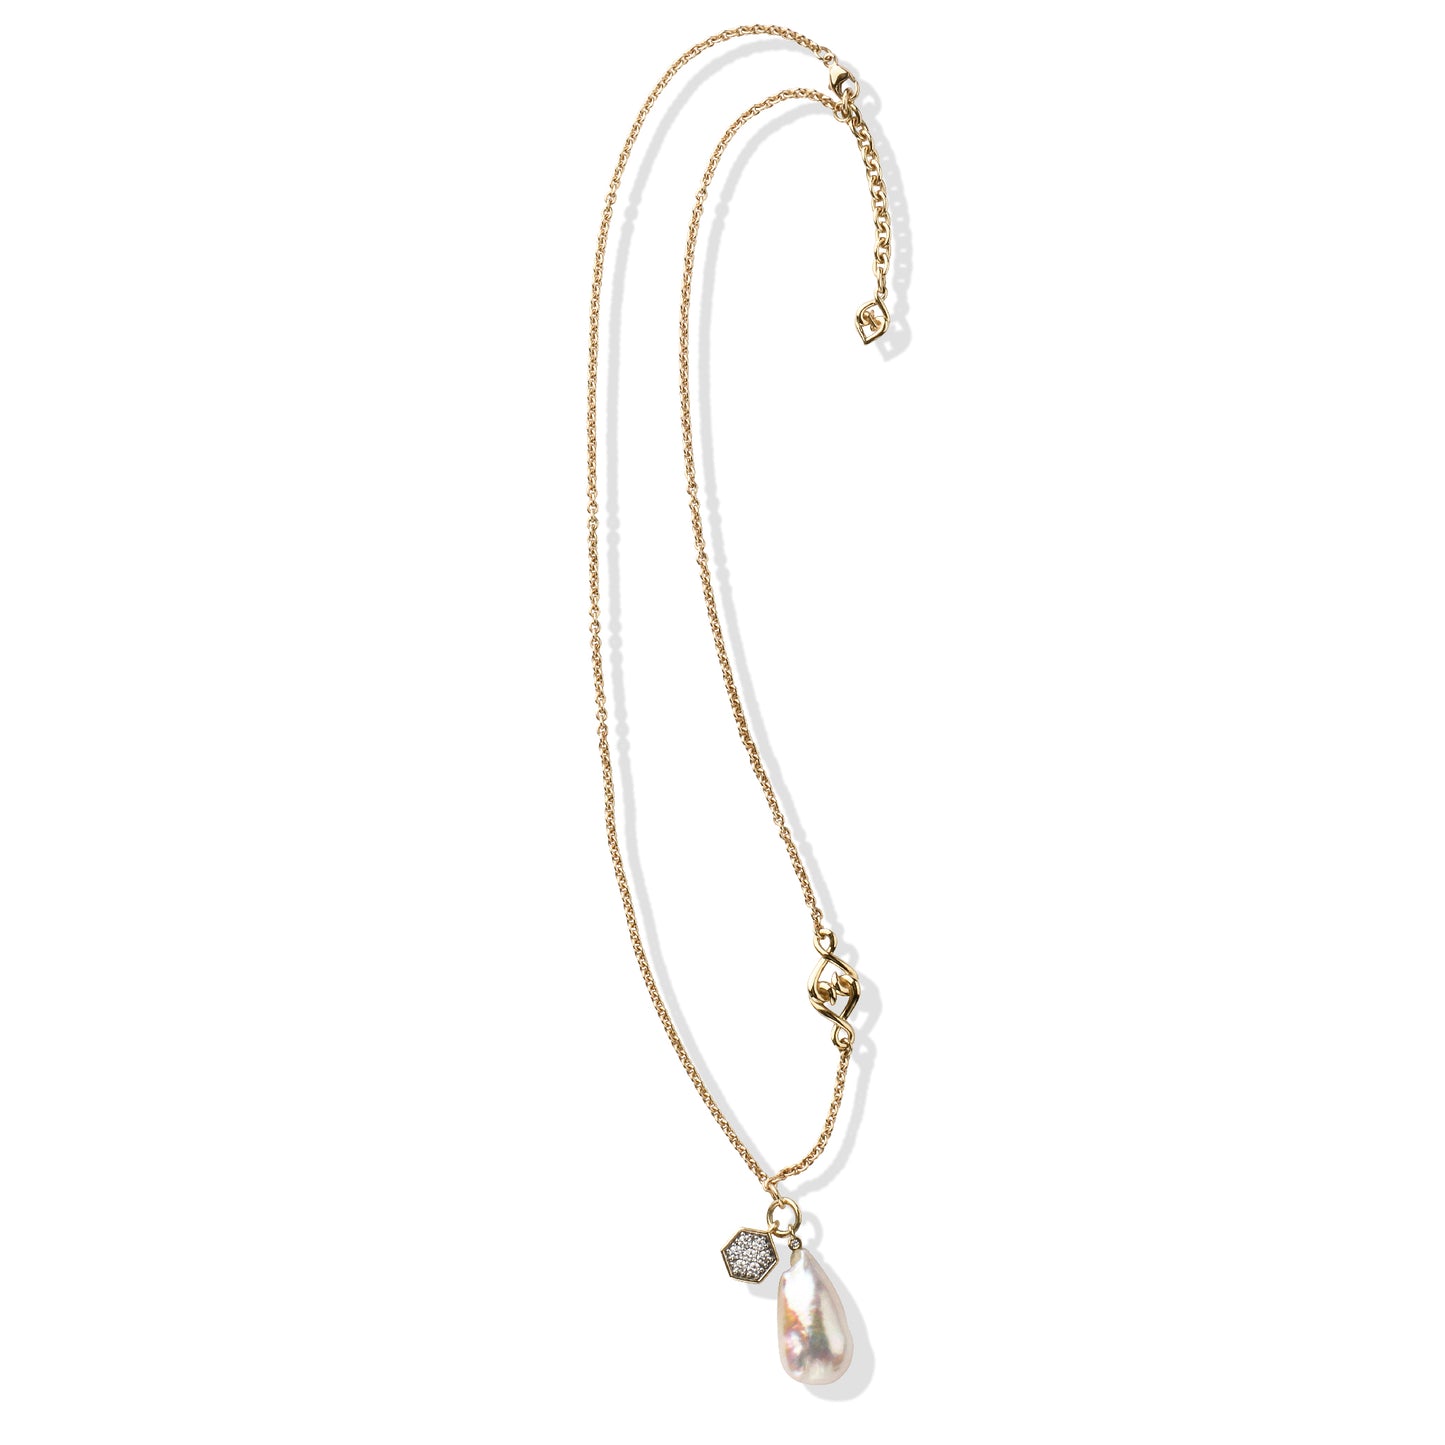 Gold Pearl Necklace | 19.5" Pearl White Sapphire Necklace with Yellow Gold Chain